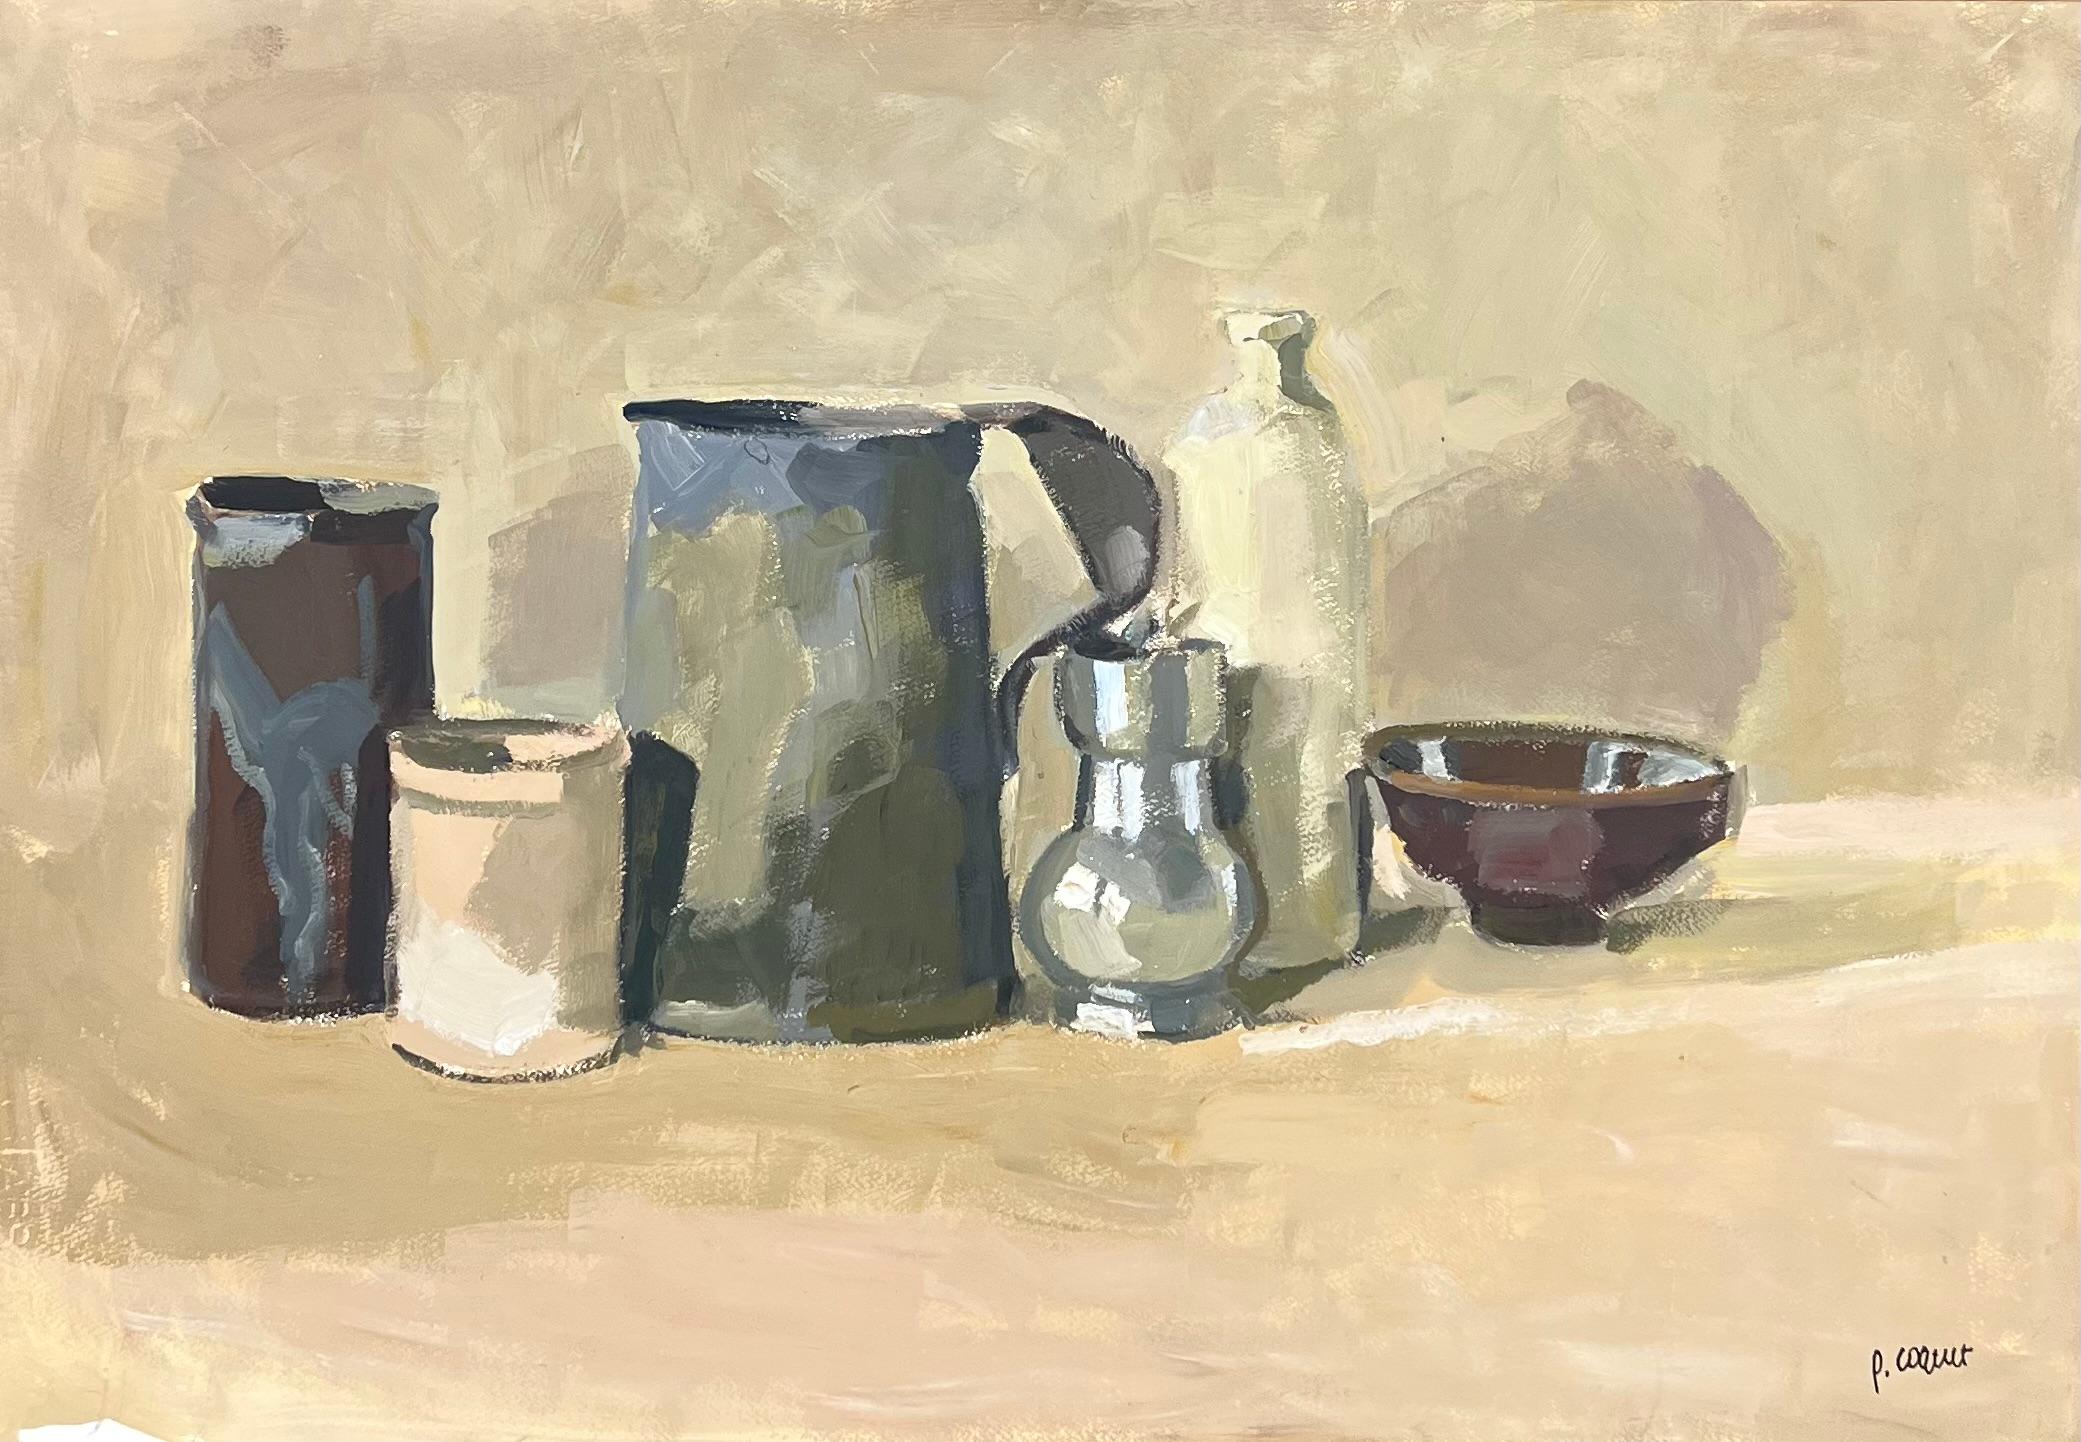 Pierre Coquet - Still life with a pewter pitcher
Reference number F445
Framed with a natural oak floated frame
50 x 73 x 2 cm (55 x 78 x 3,5 cm frame included)
This work is painted with oil on a paper that is laid on a canvas and placed in a made to